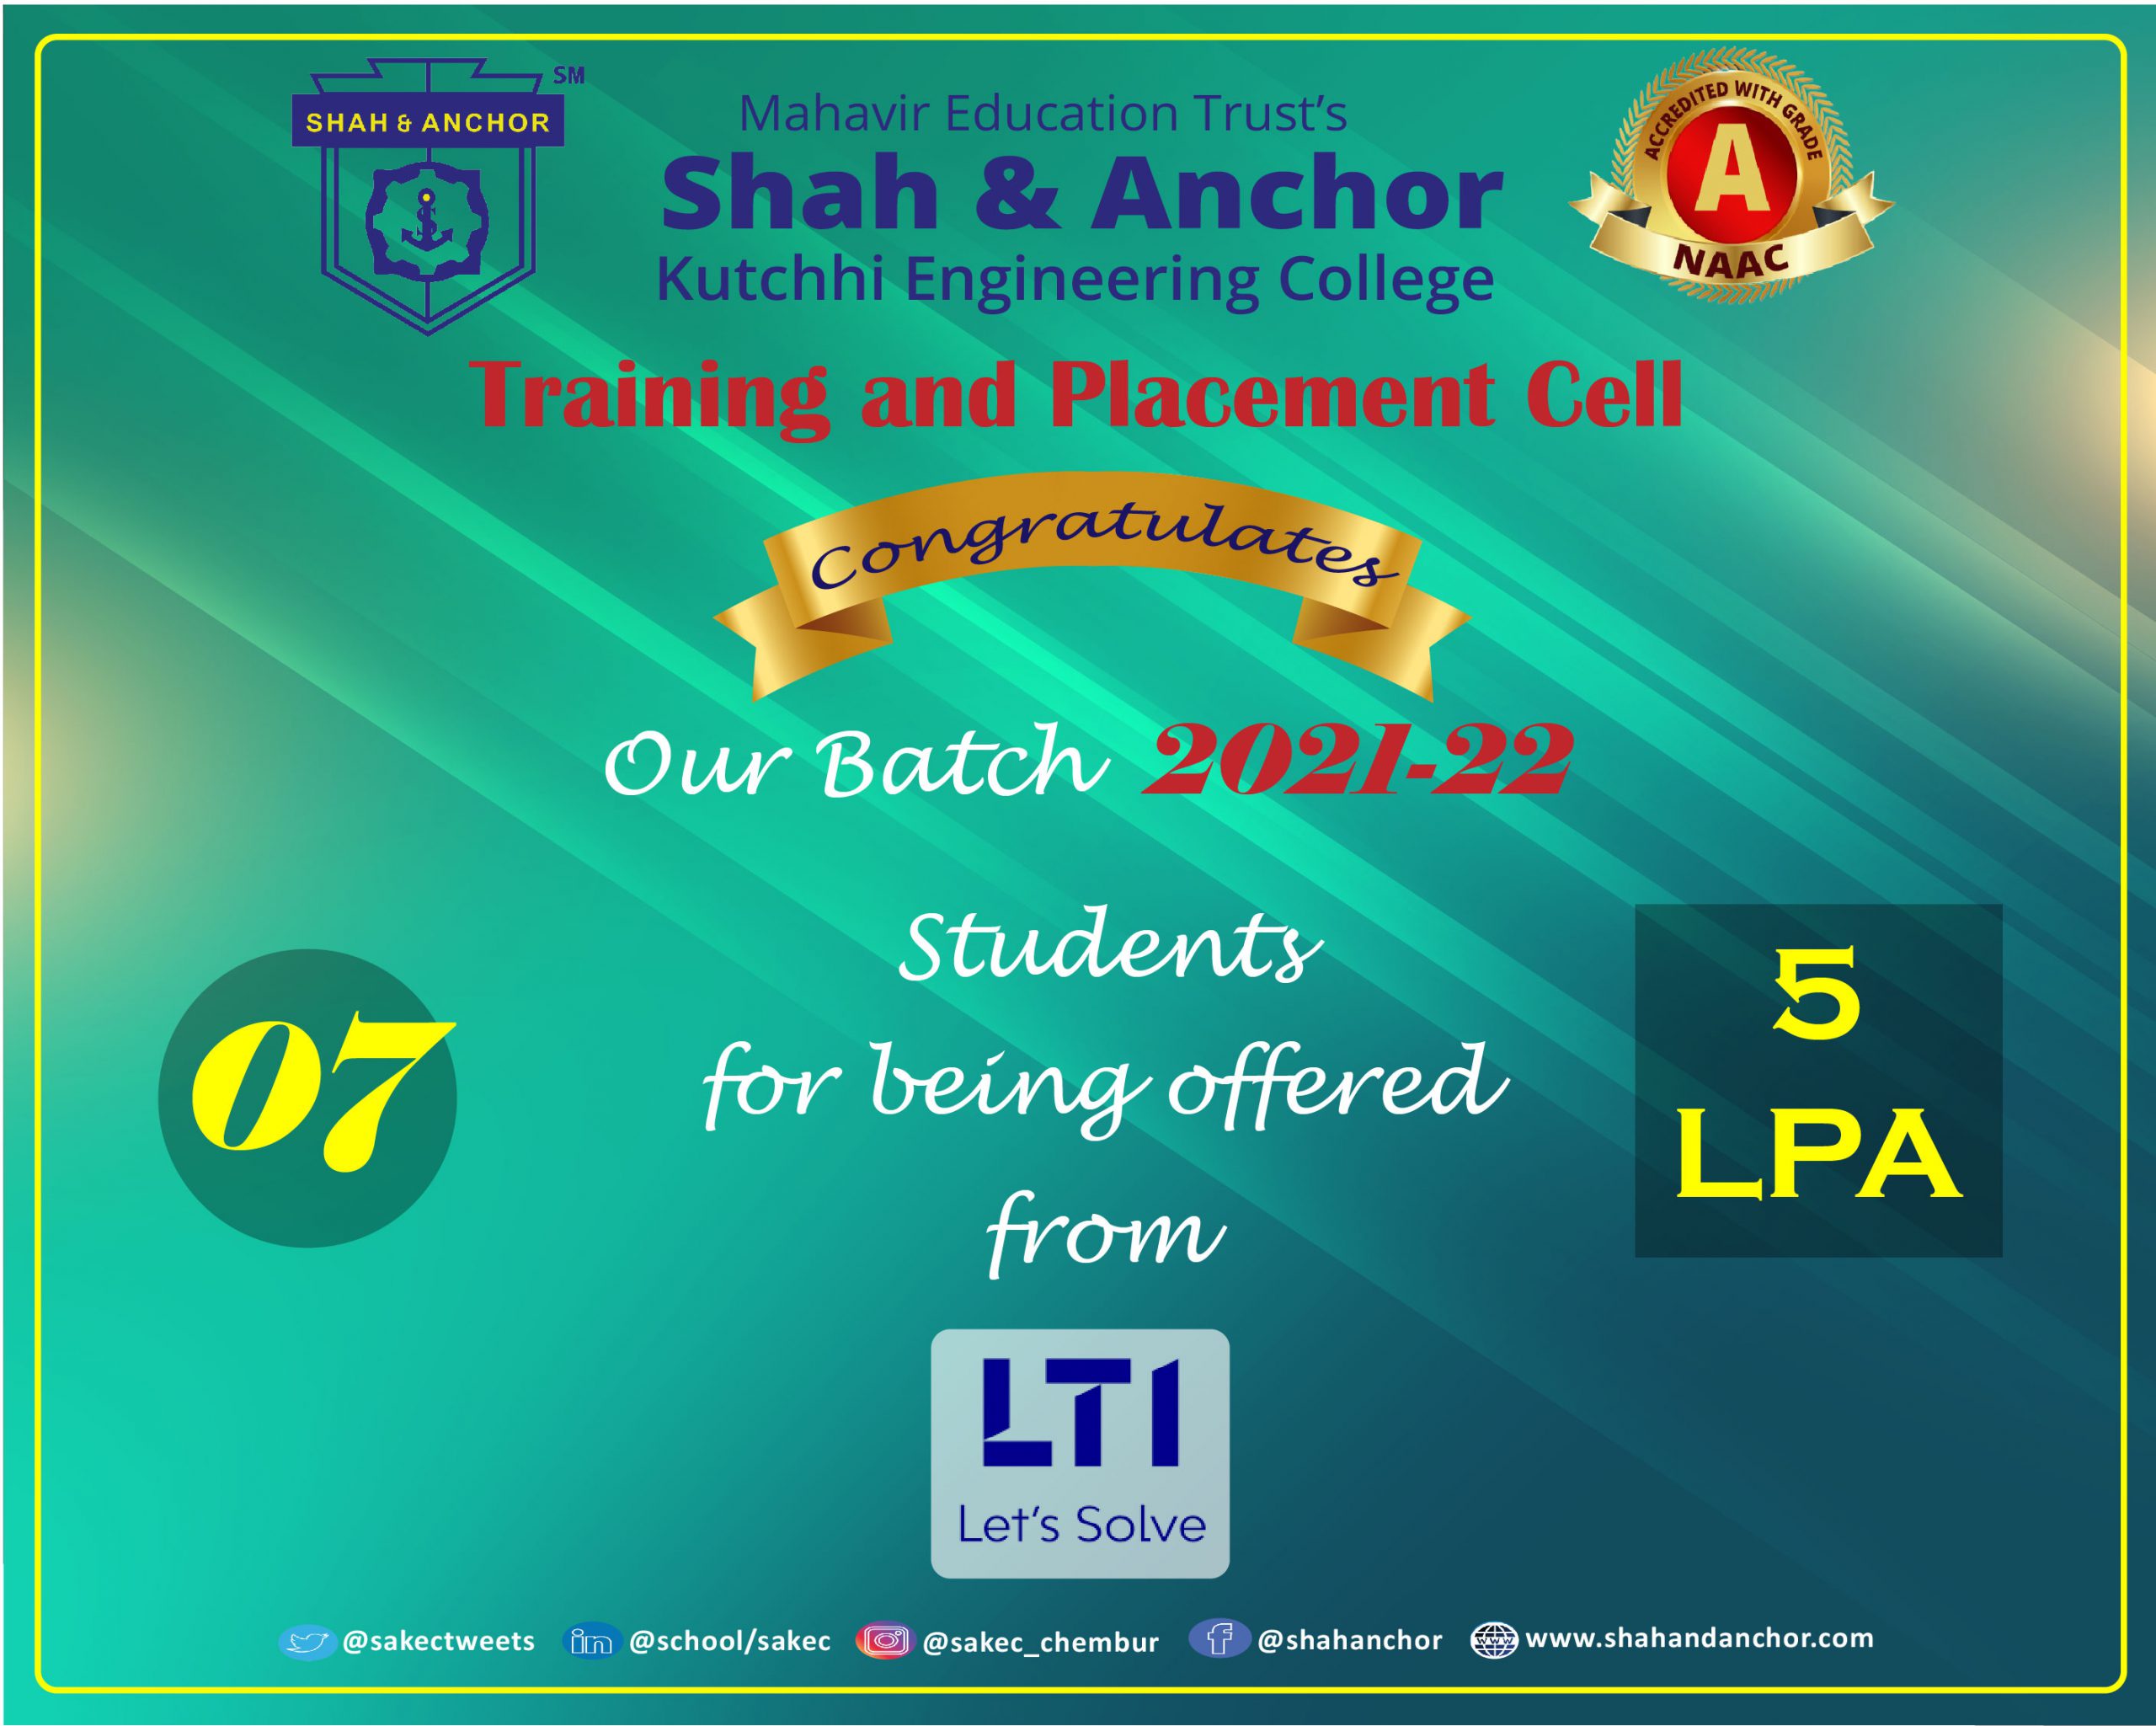 L & T Infotech placed students